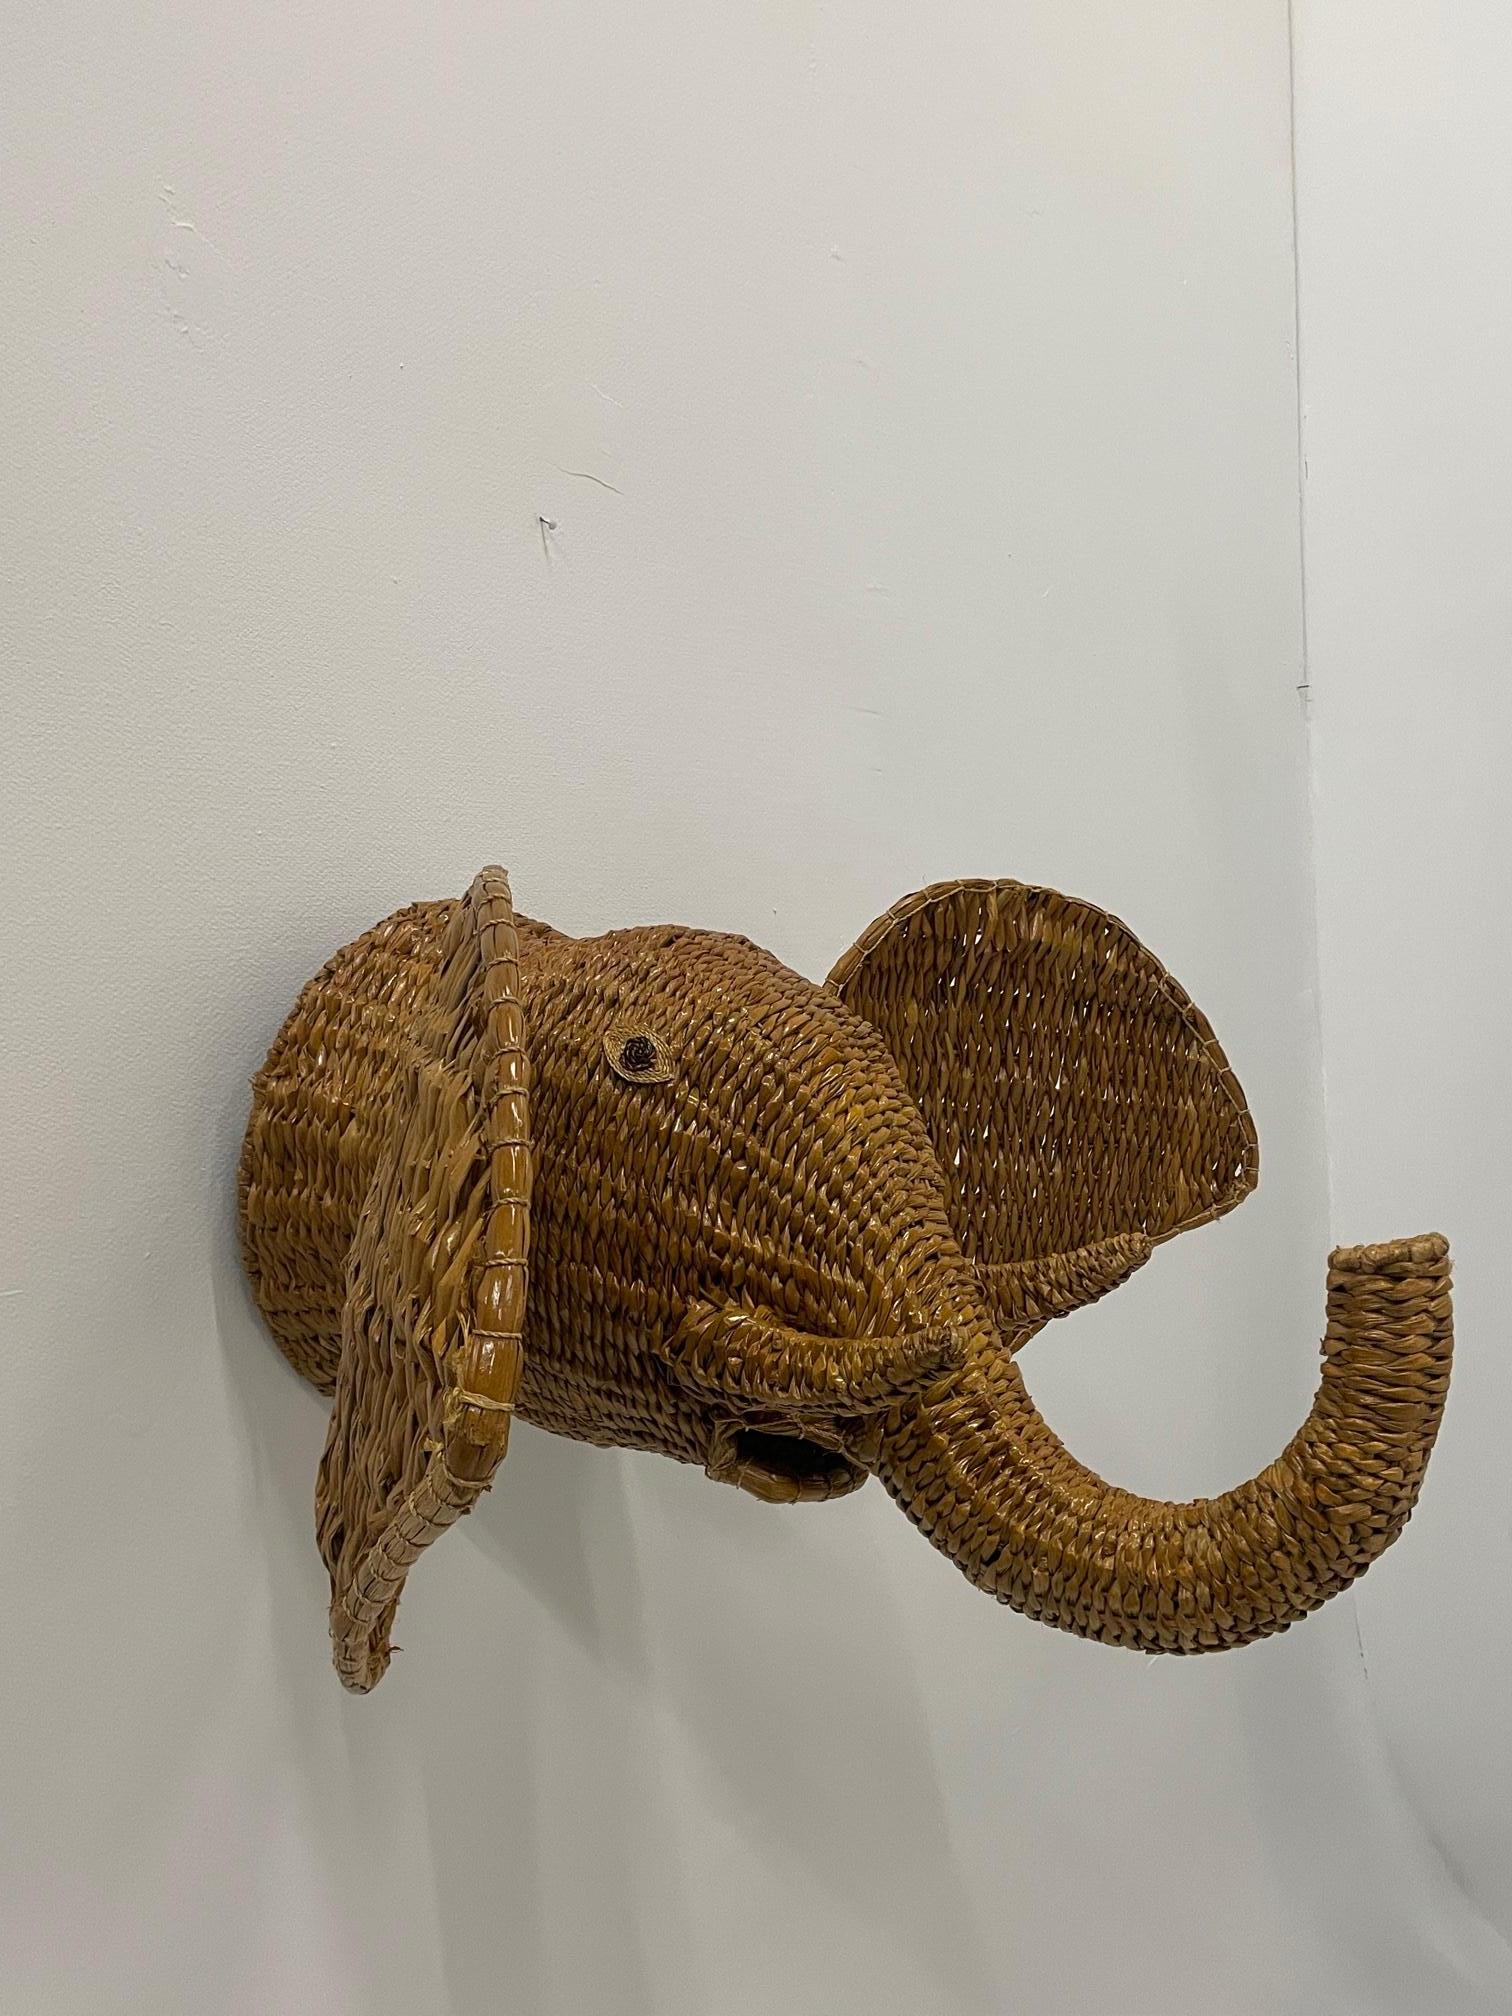 Organic Modern Monumental Surprising Water Hyacinth Elephant Trophy Head Wall Sculpture For Sale